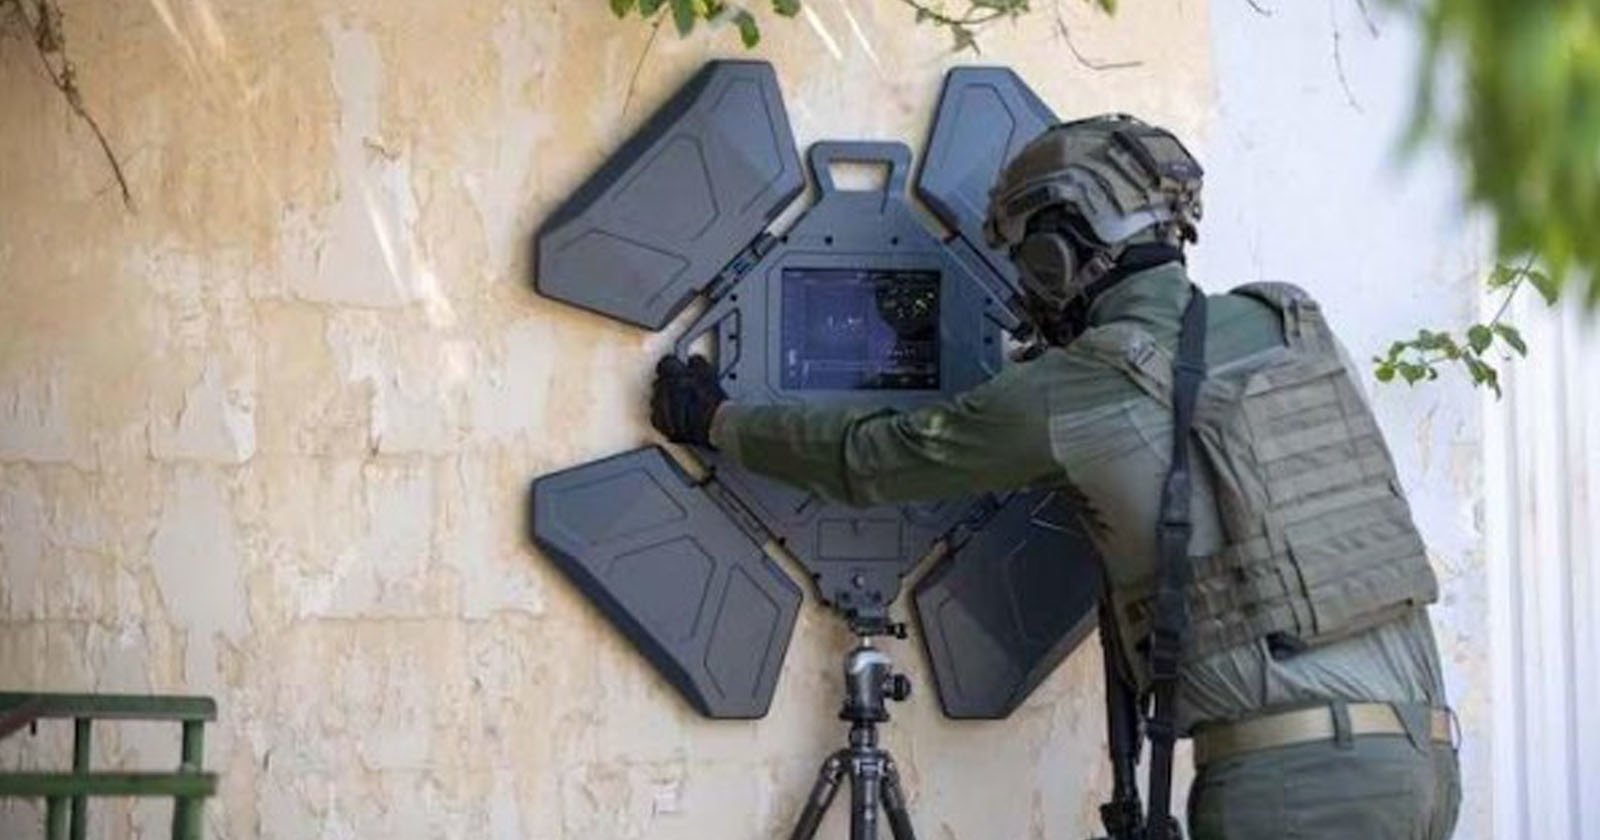 The Xaver 1000 Sees Through Walls and is Made for the Israeli Army